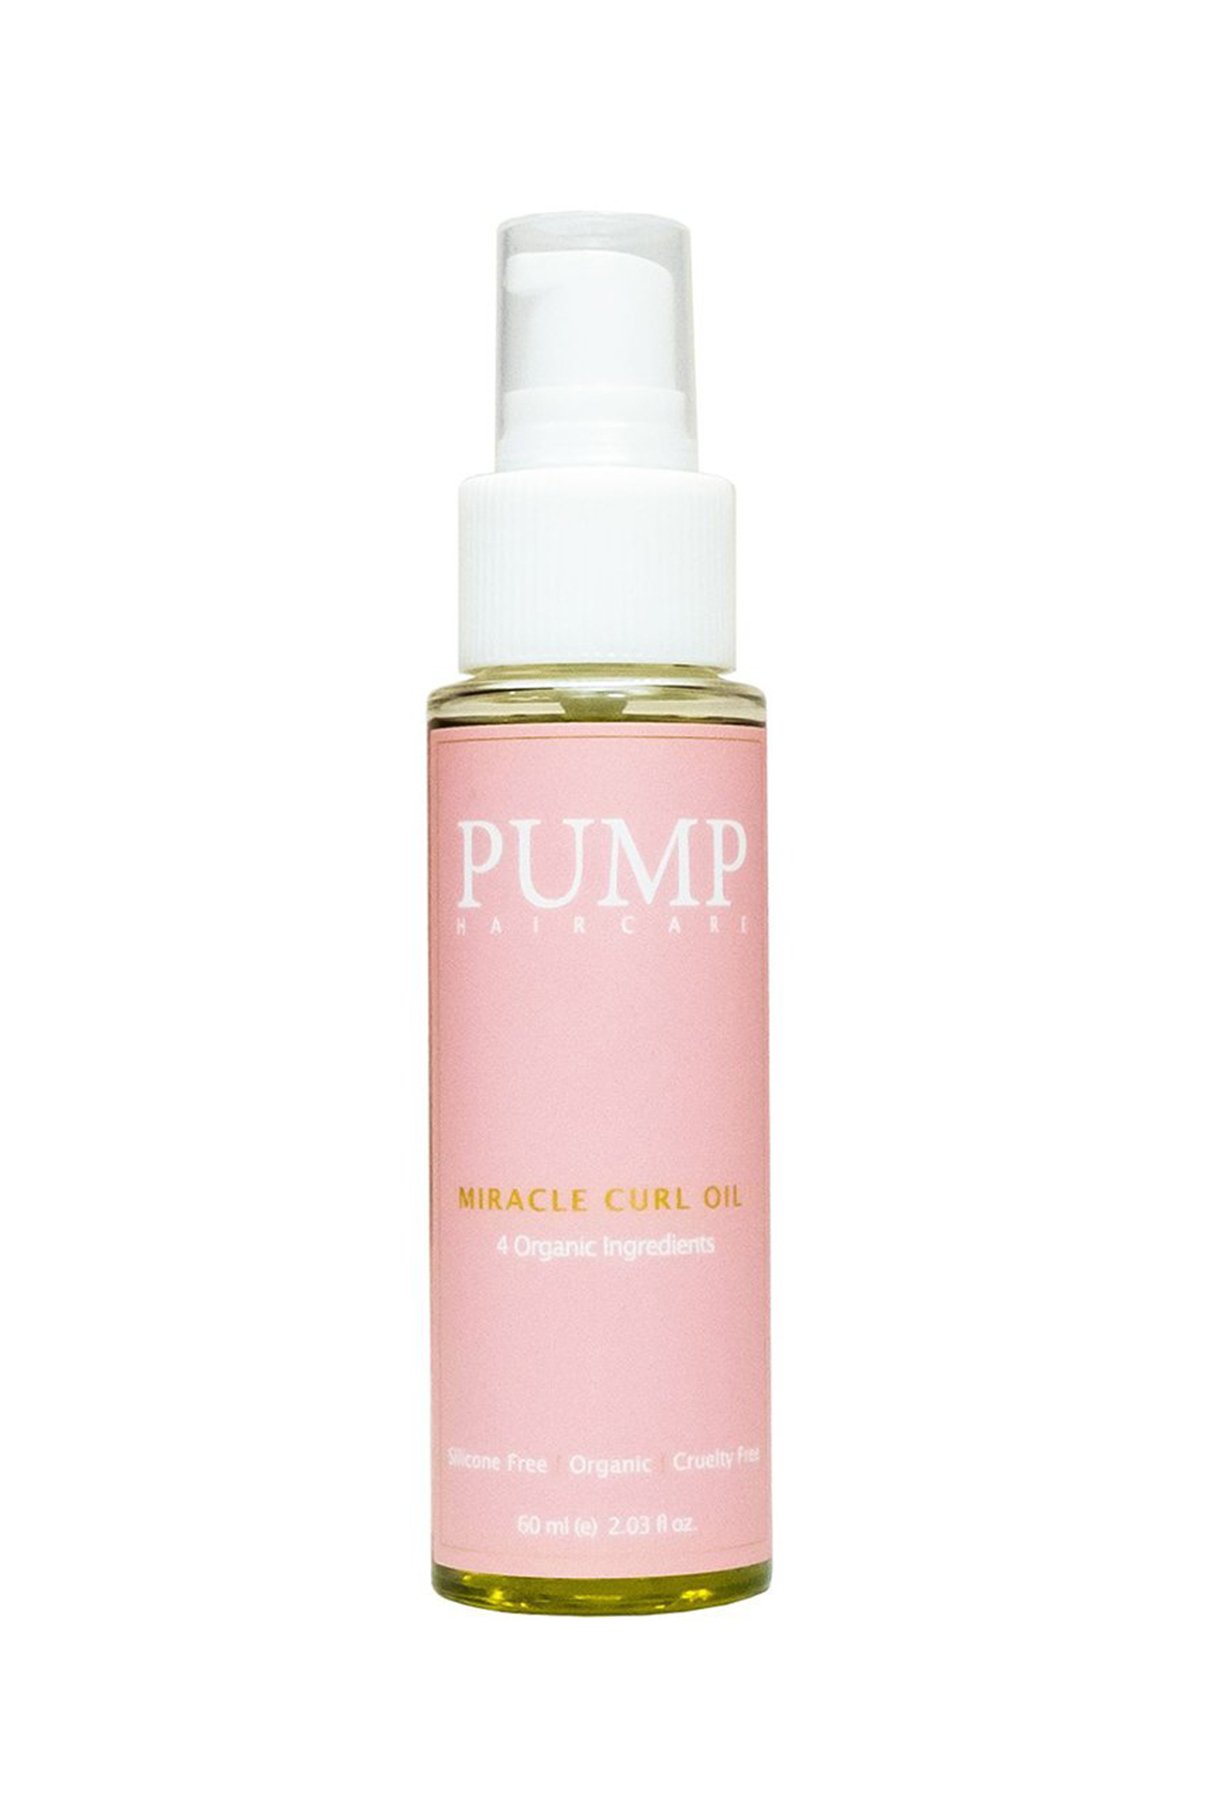 Pump Haircare Miracle Curl Oil